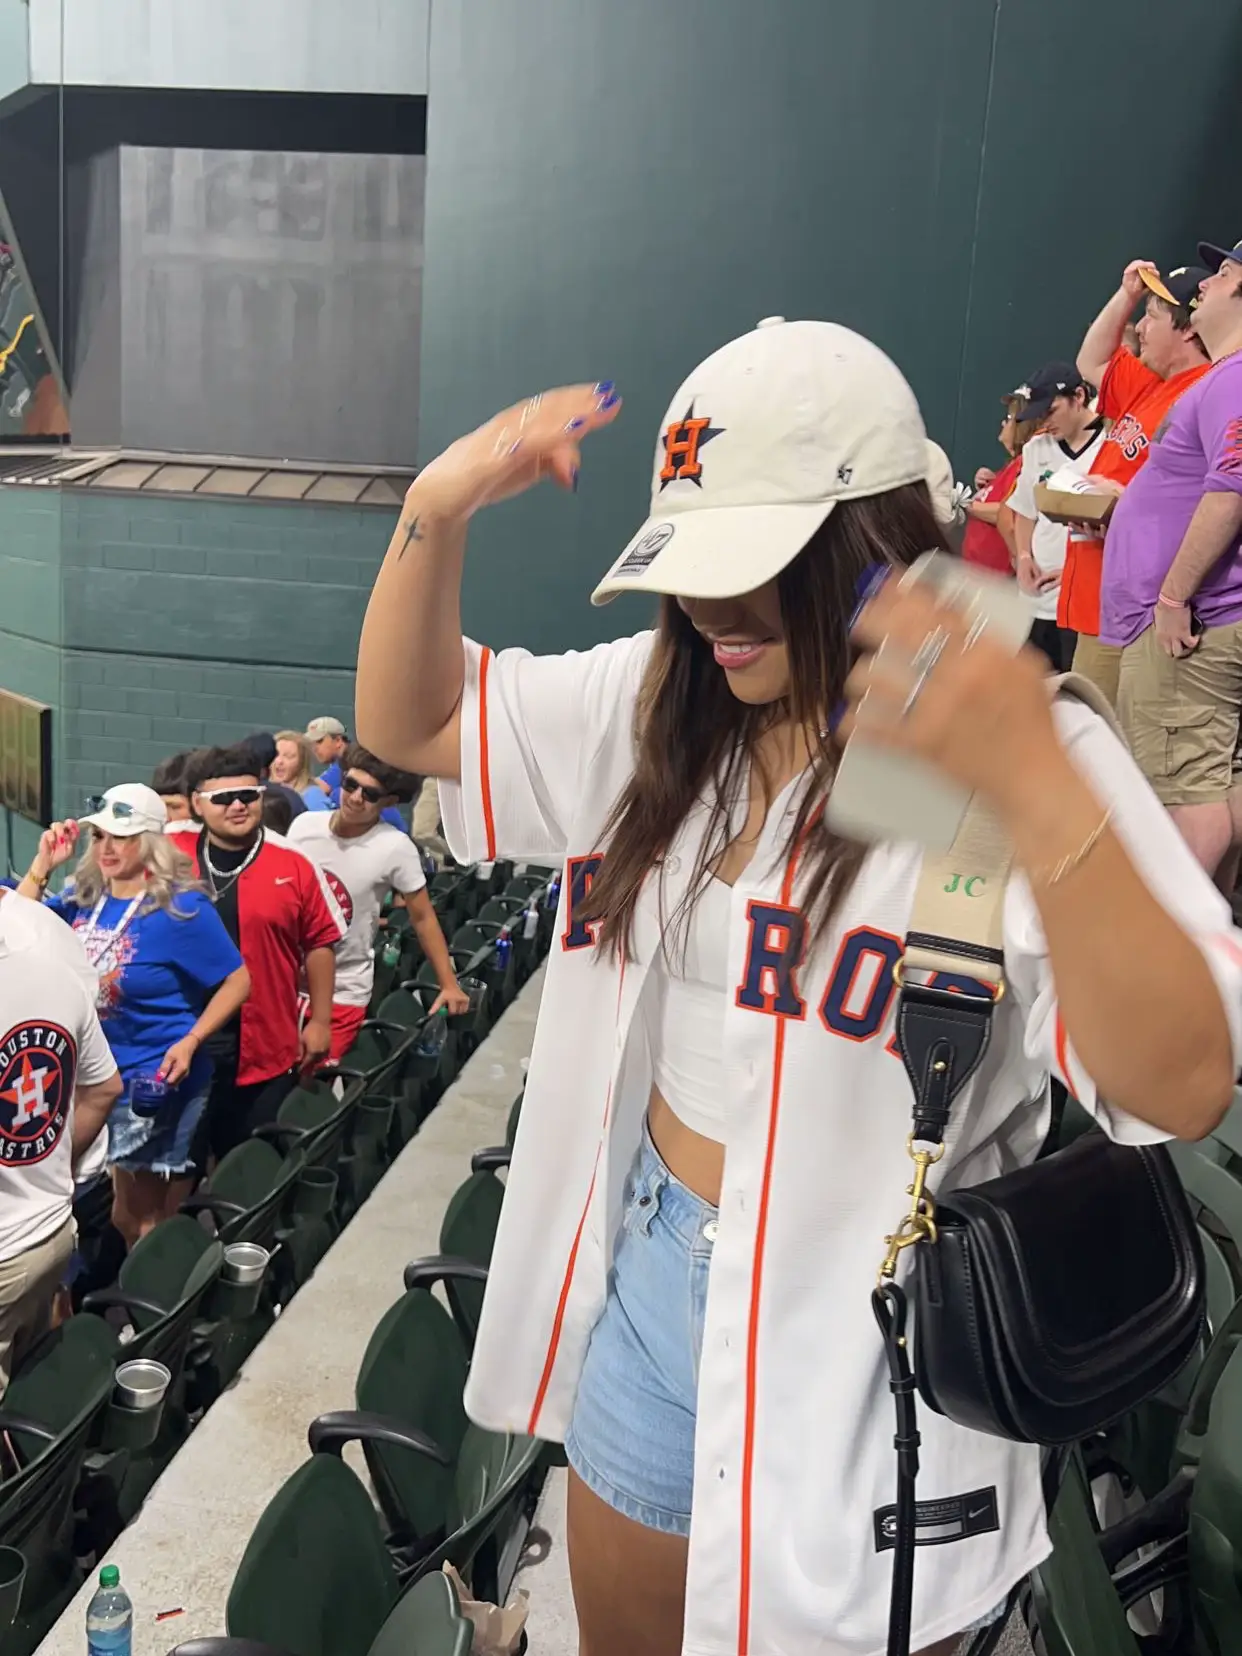 BASEBALL GAME OUTFIT & PIC INSPO